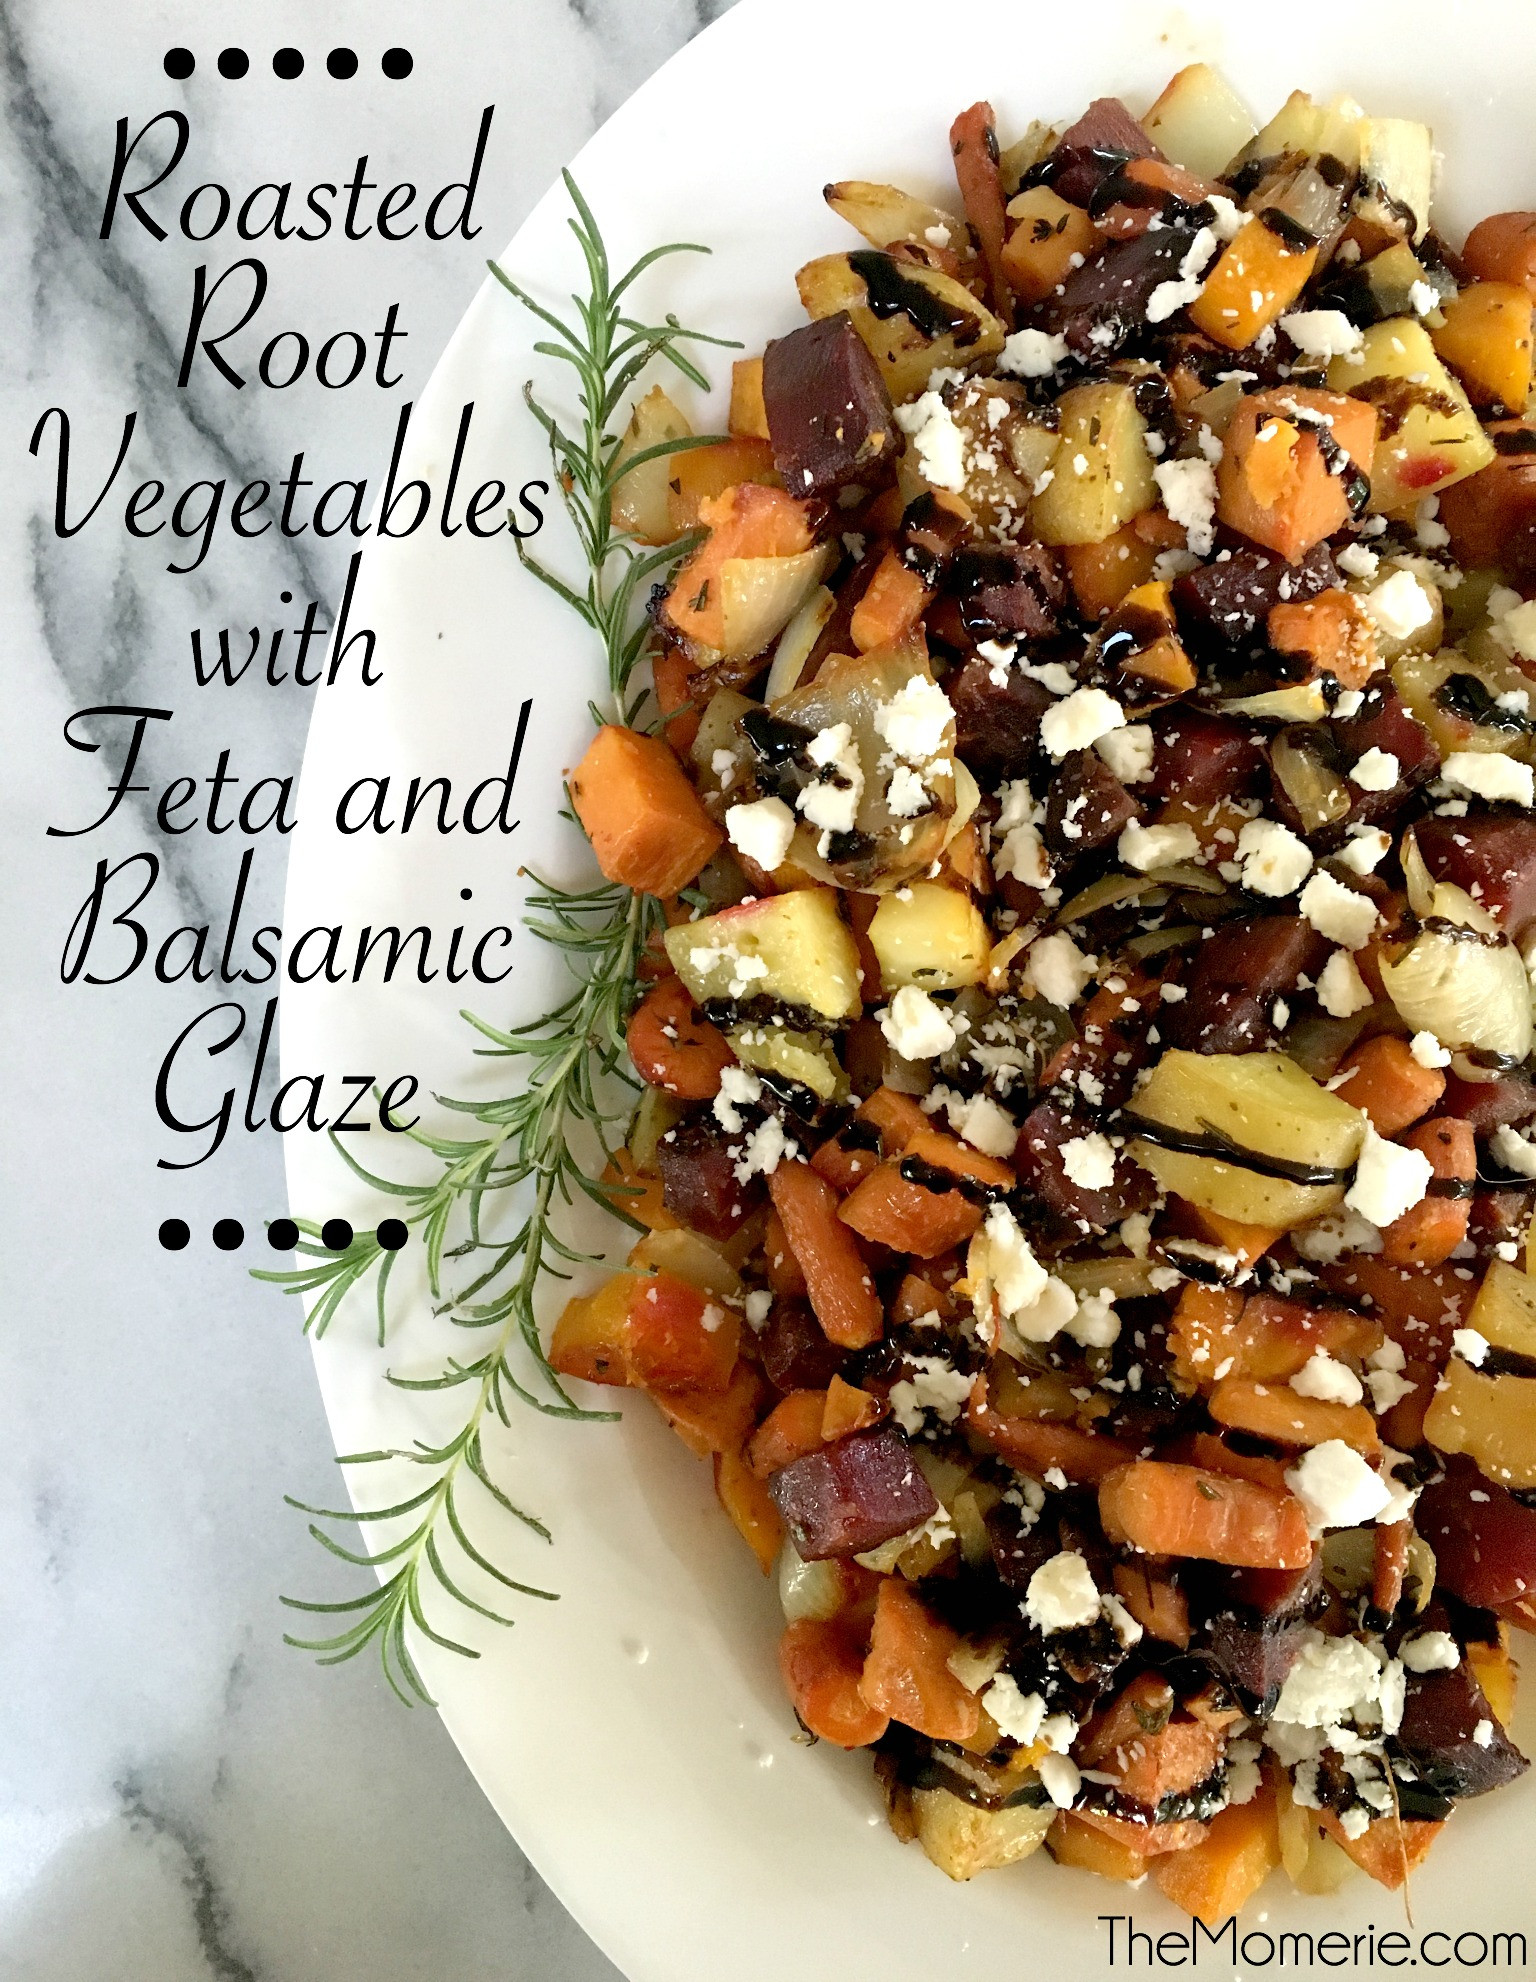 Roasted Vegetables With Balsamic Glaze
 Roasted Root Ve ables with Feta and Balsamic Glaze